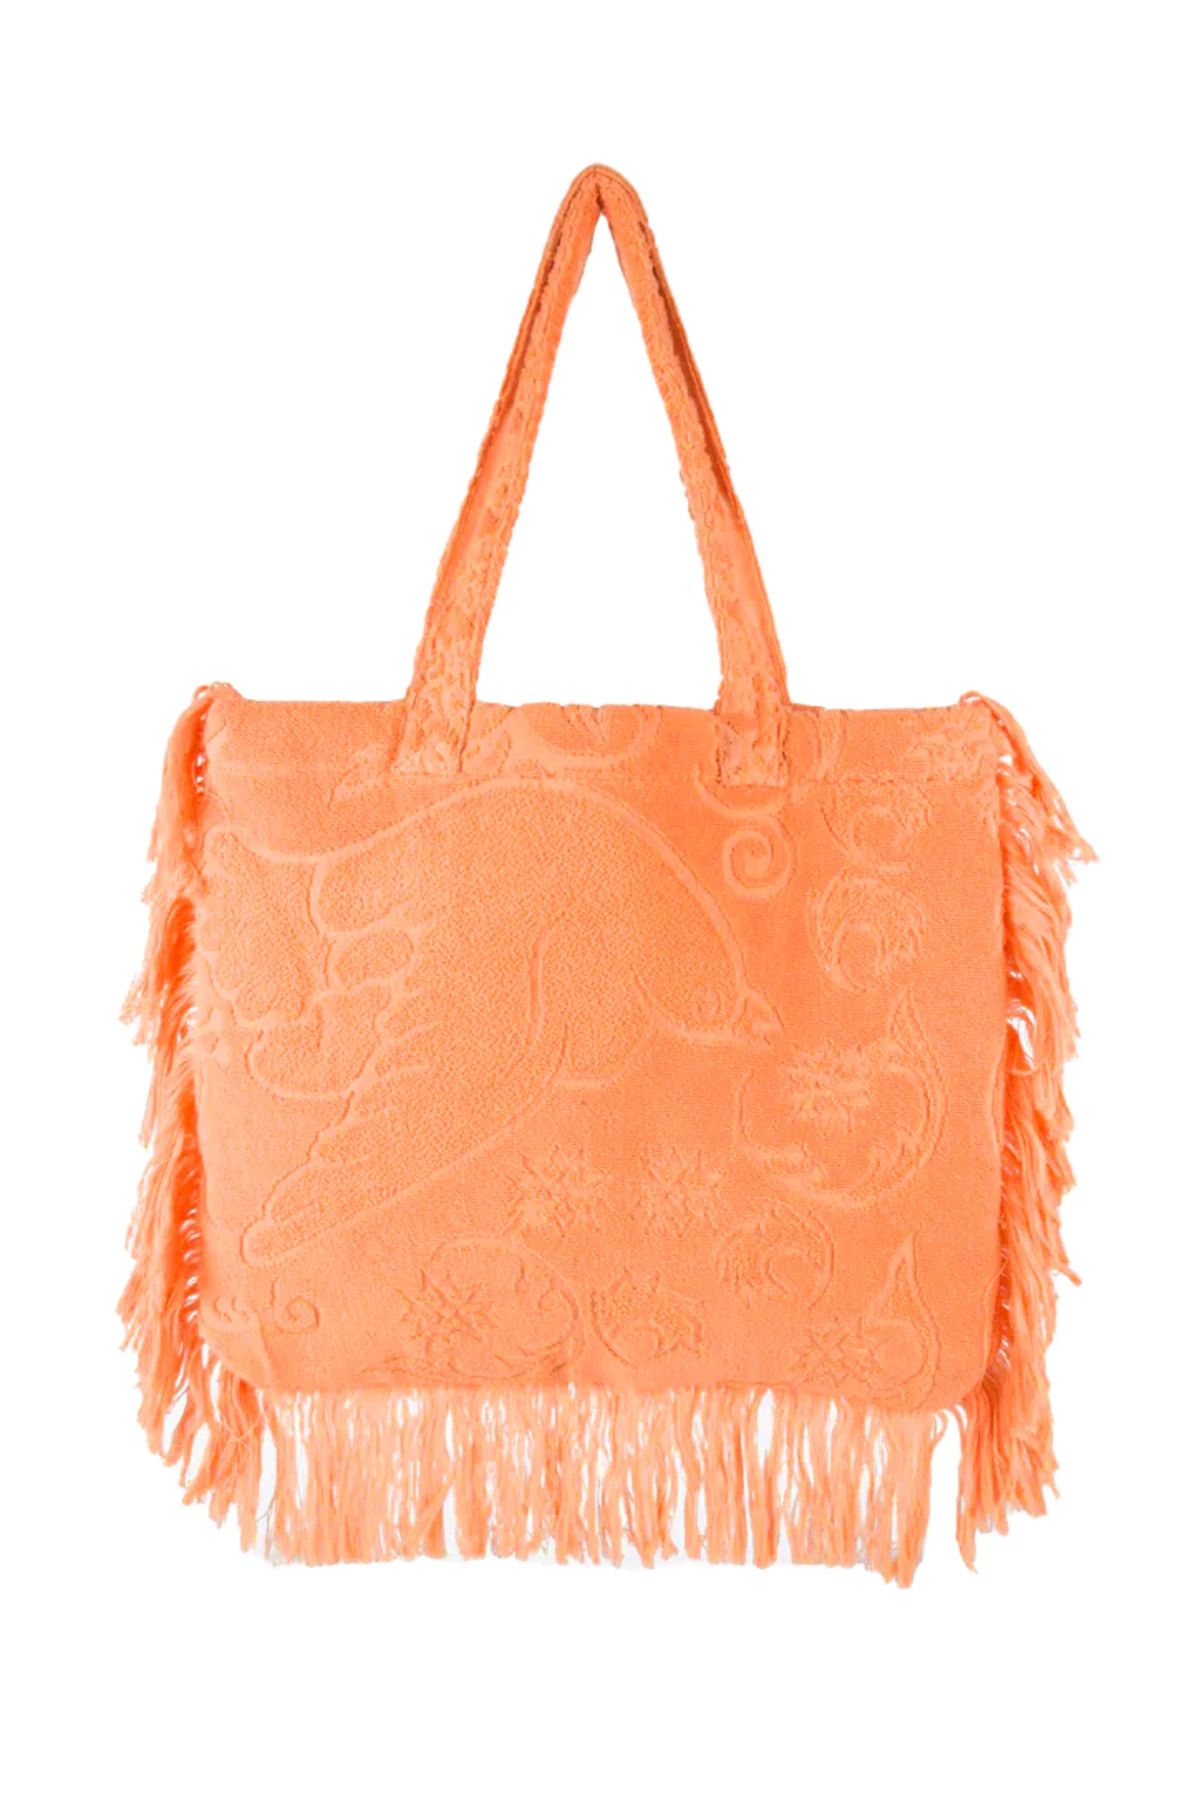 Hippy Tote | Everything But Water